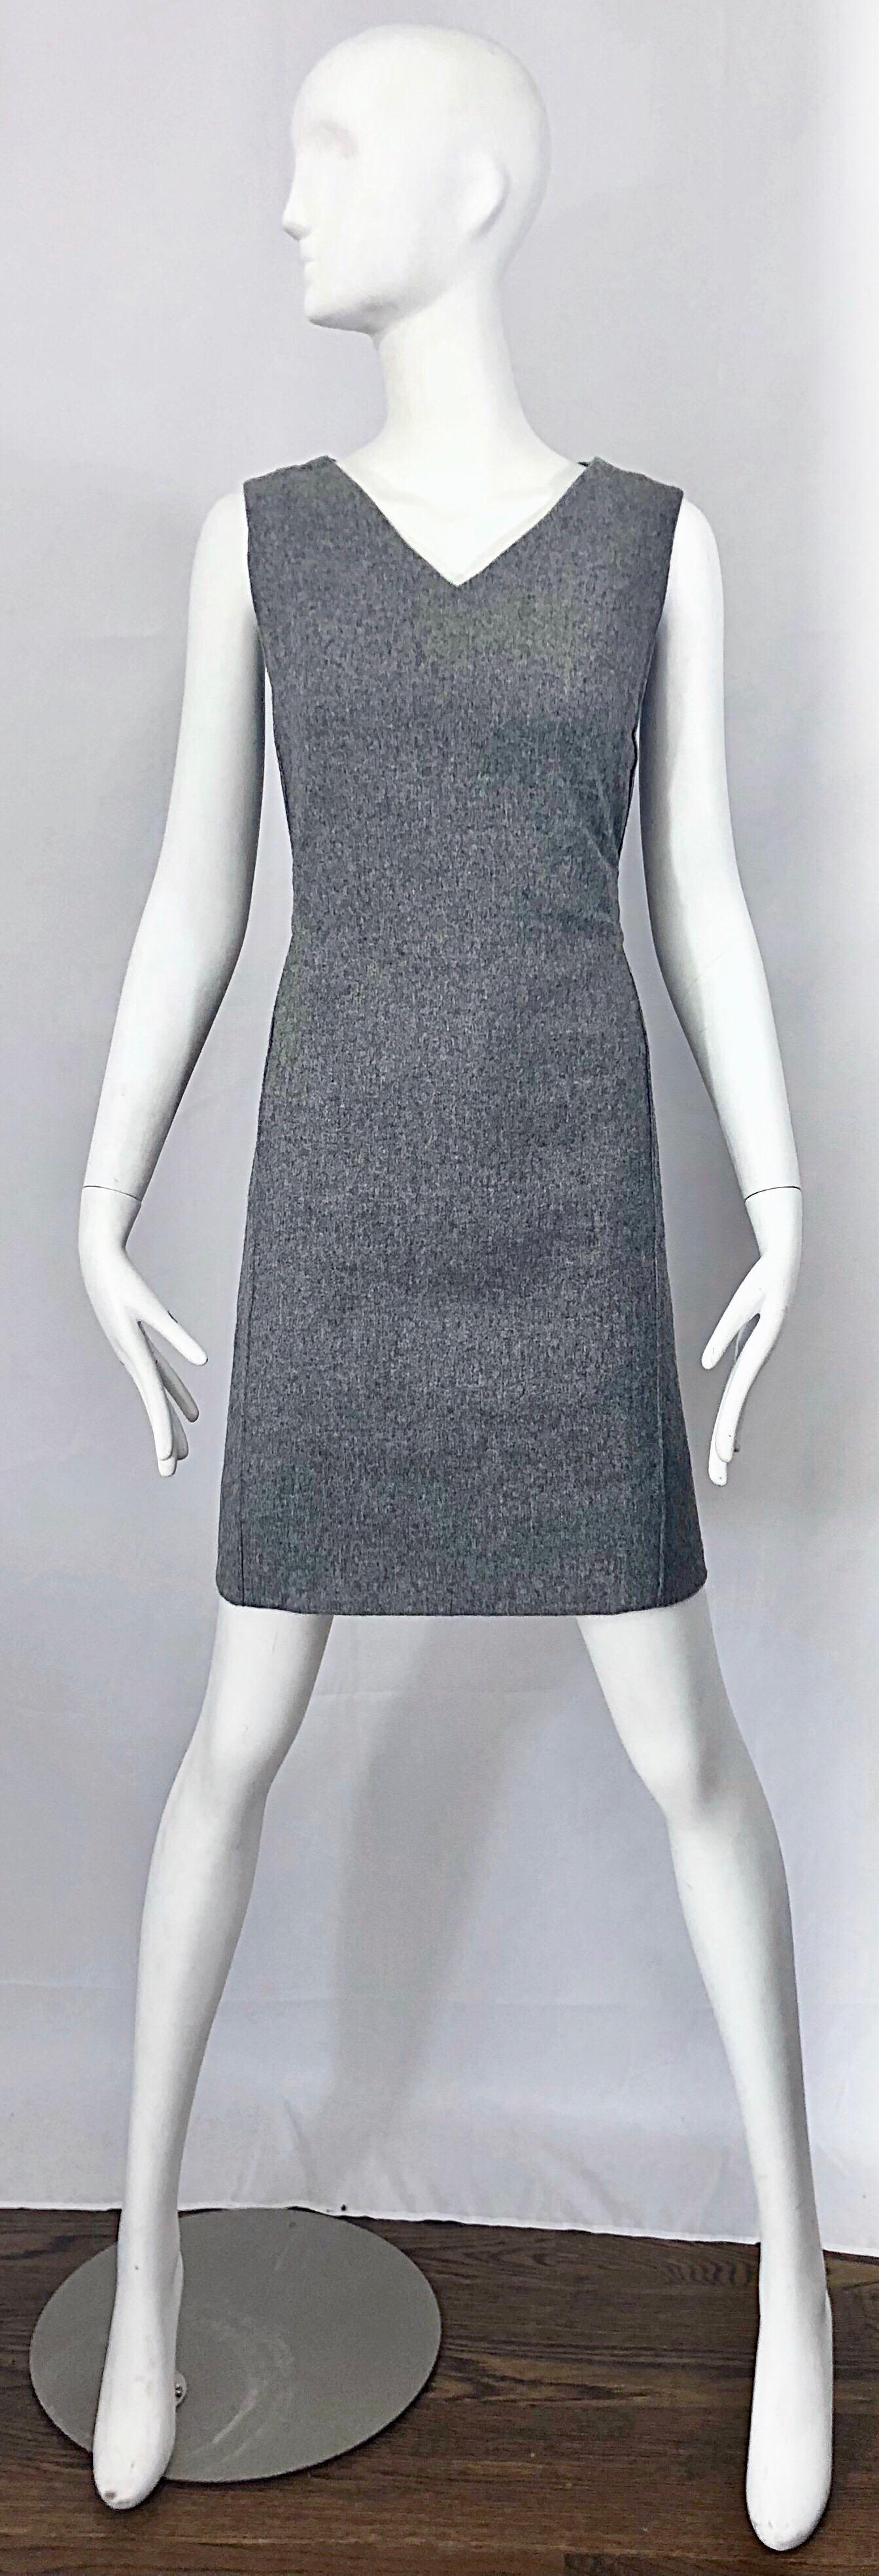 Chic 1960s Heather Gray Wool Sleeveless Vintage 60s Mod Shift Dress For Sale 6